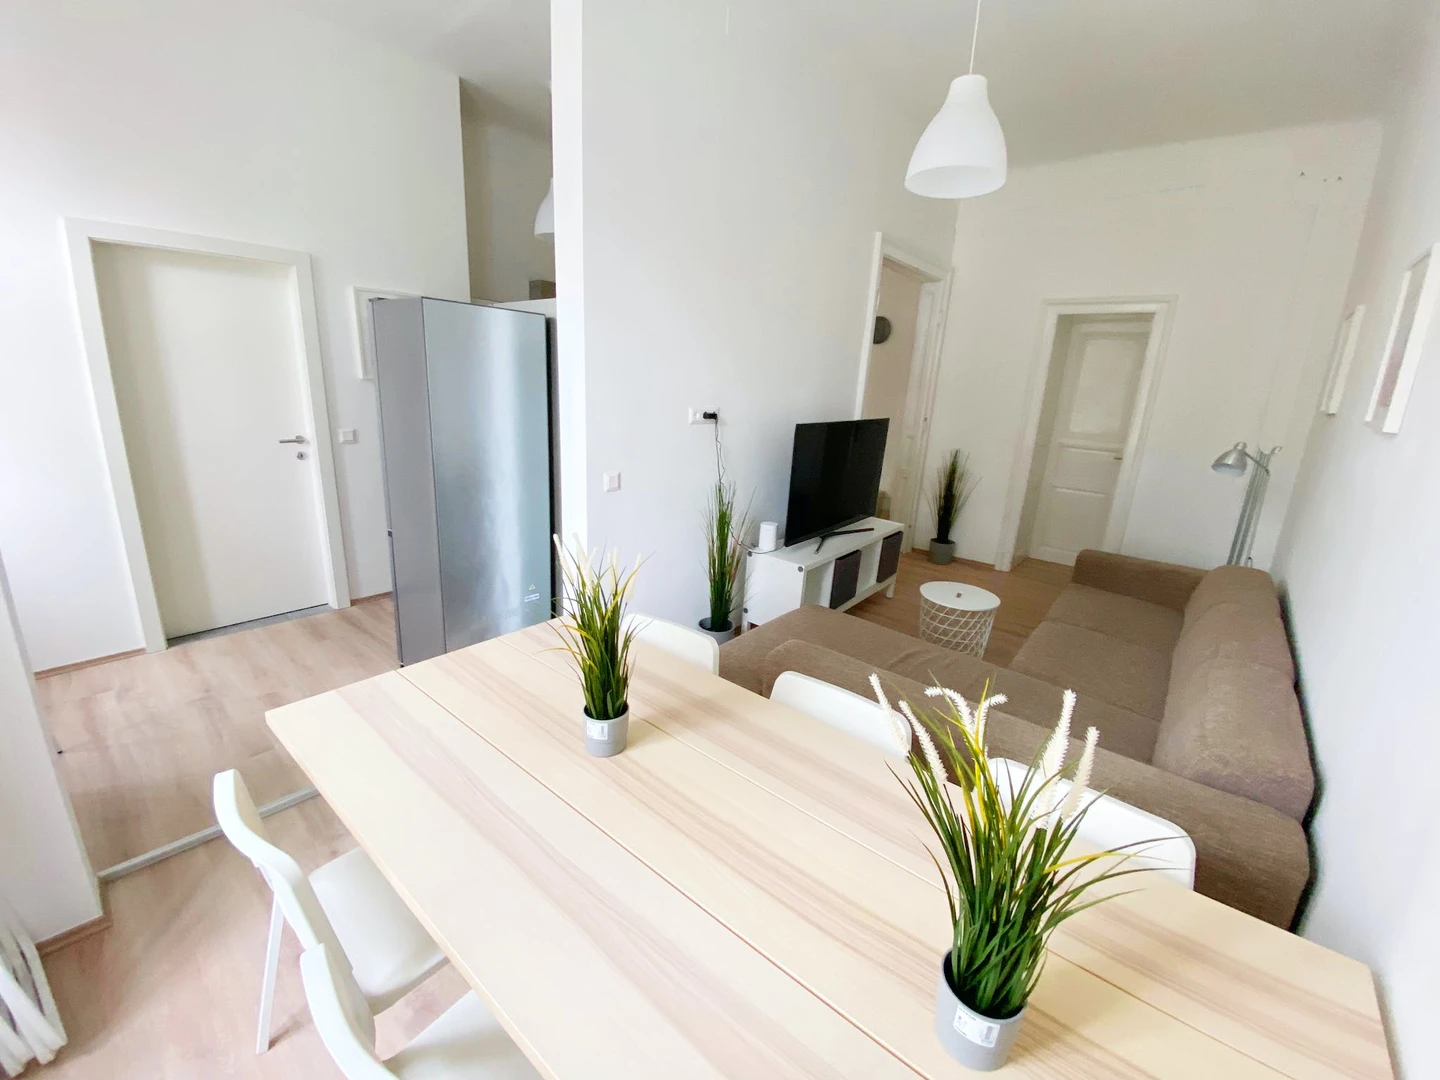 Room for rent in a shared flat in Graz